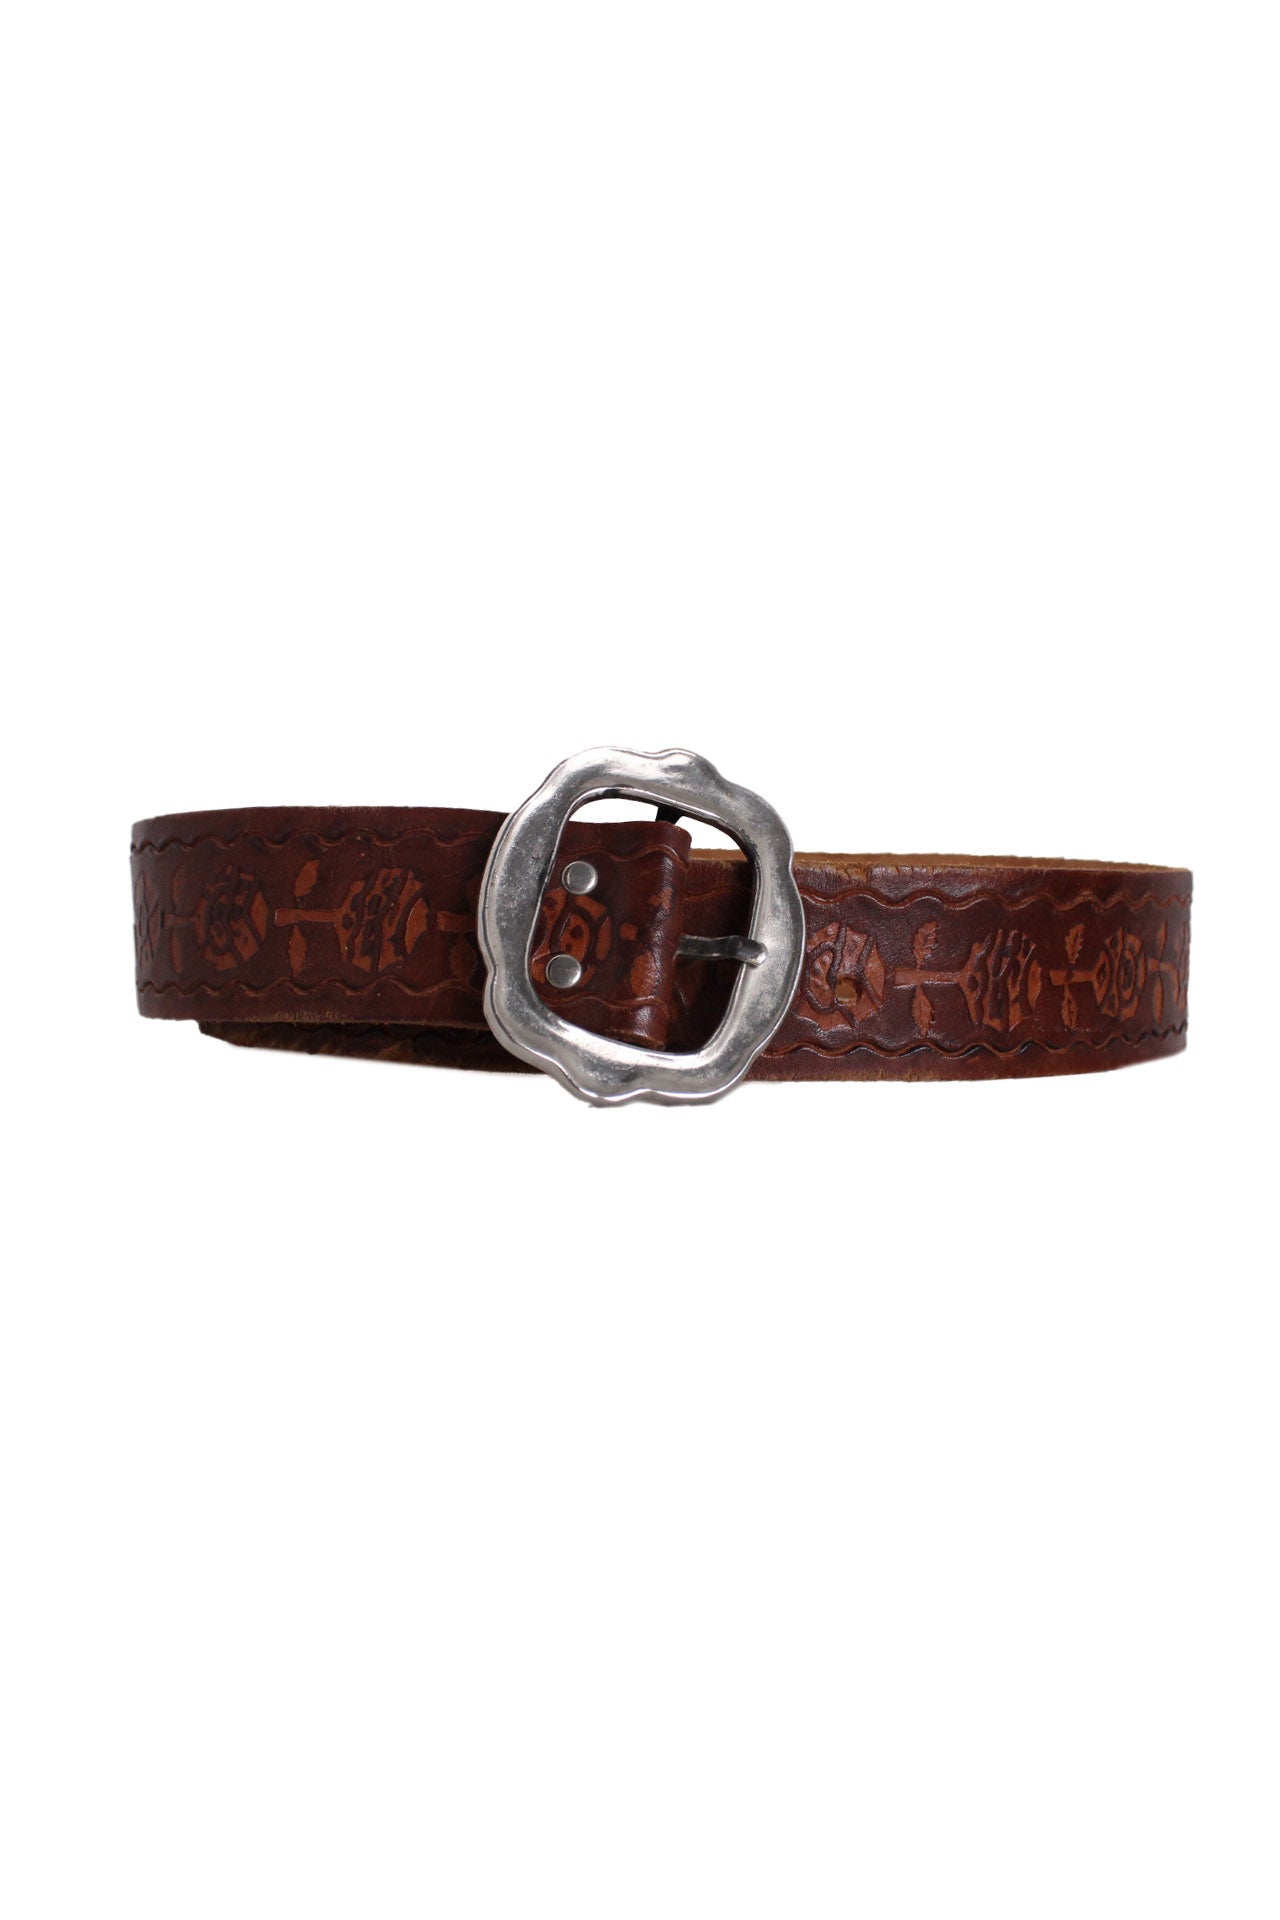 front angle vintage brown toned tooled leather belt featuring abstract floral tooled motif, adjustable 6-hole closure, and scalloped silver toned buckle.